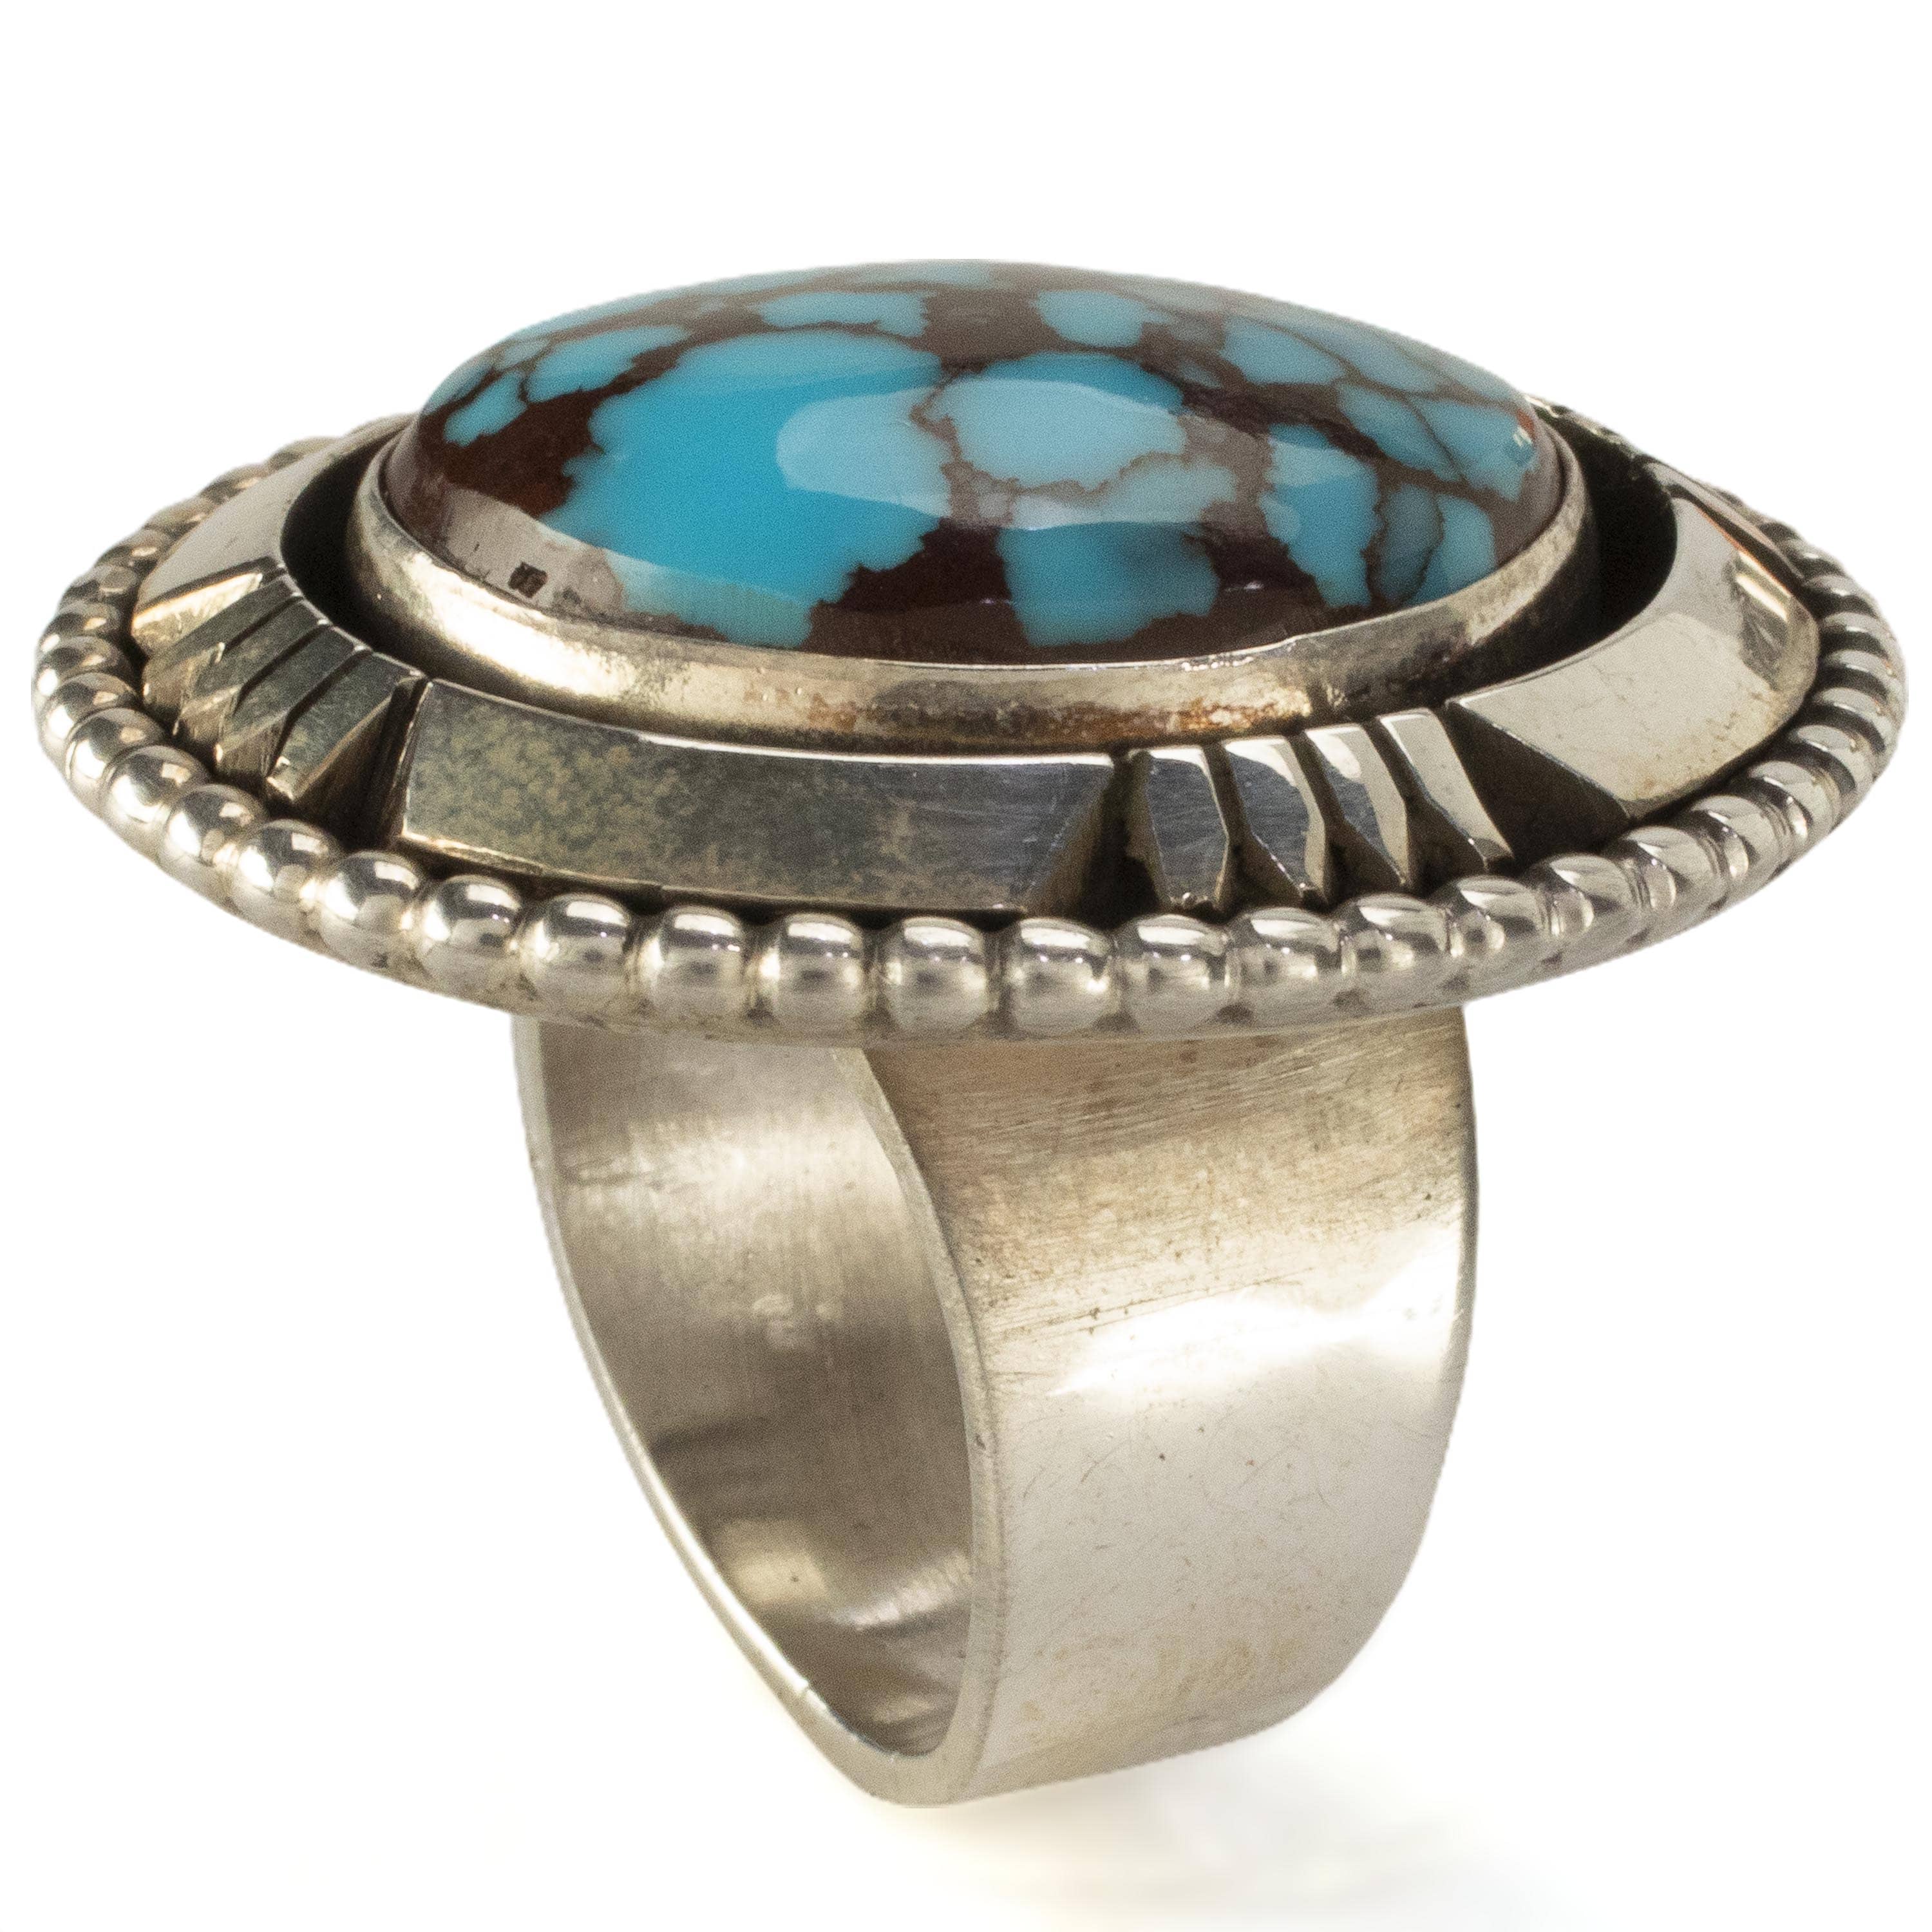 Kalifano Native American Jewelry 7 Eddie Secatero Navajo Prince Turquoise USA Native American Made 925 Sterling Silver Ring NAR1600.006.7